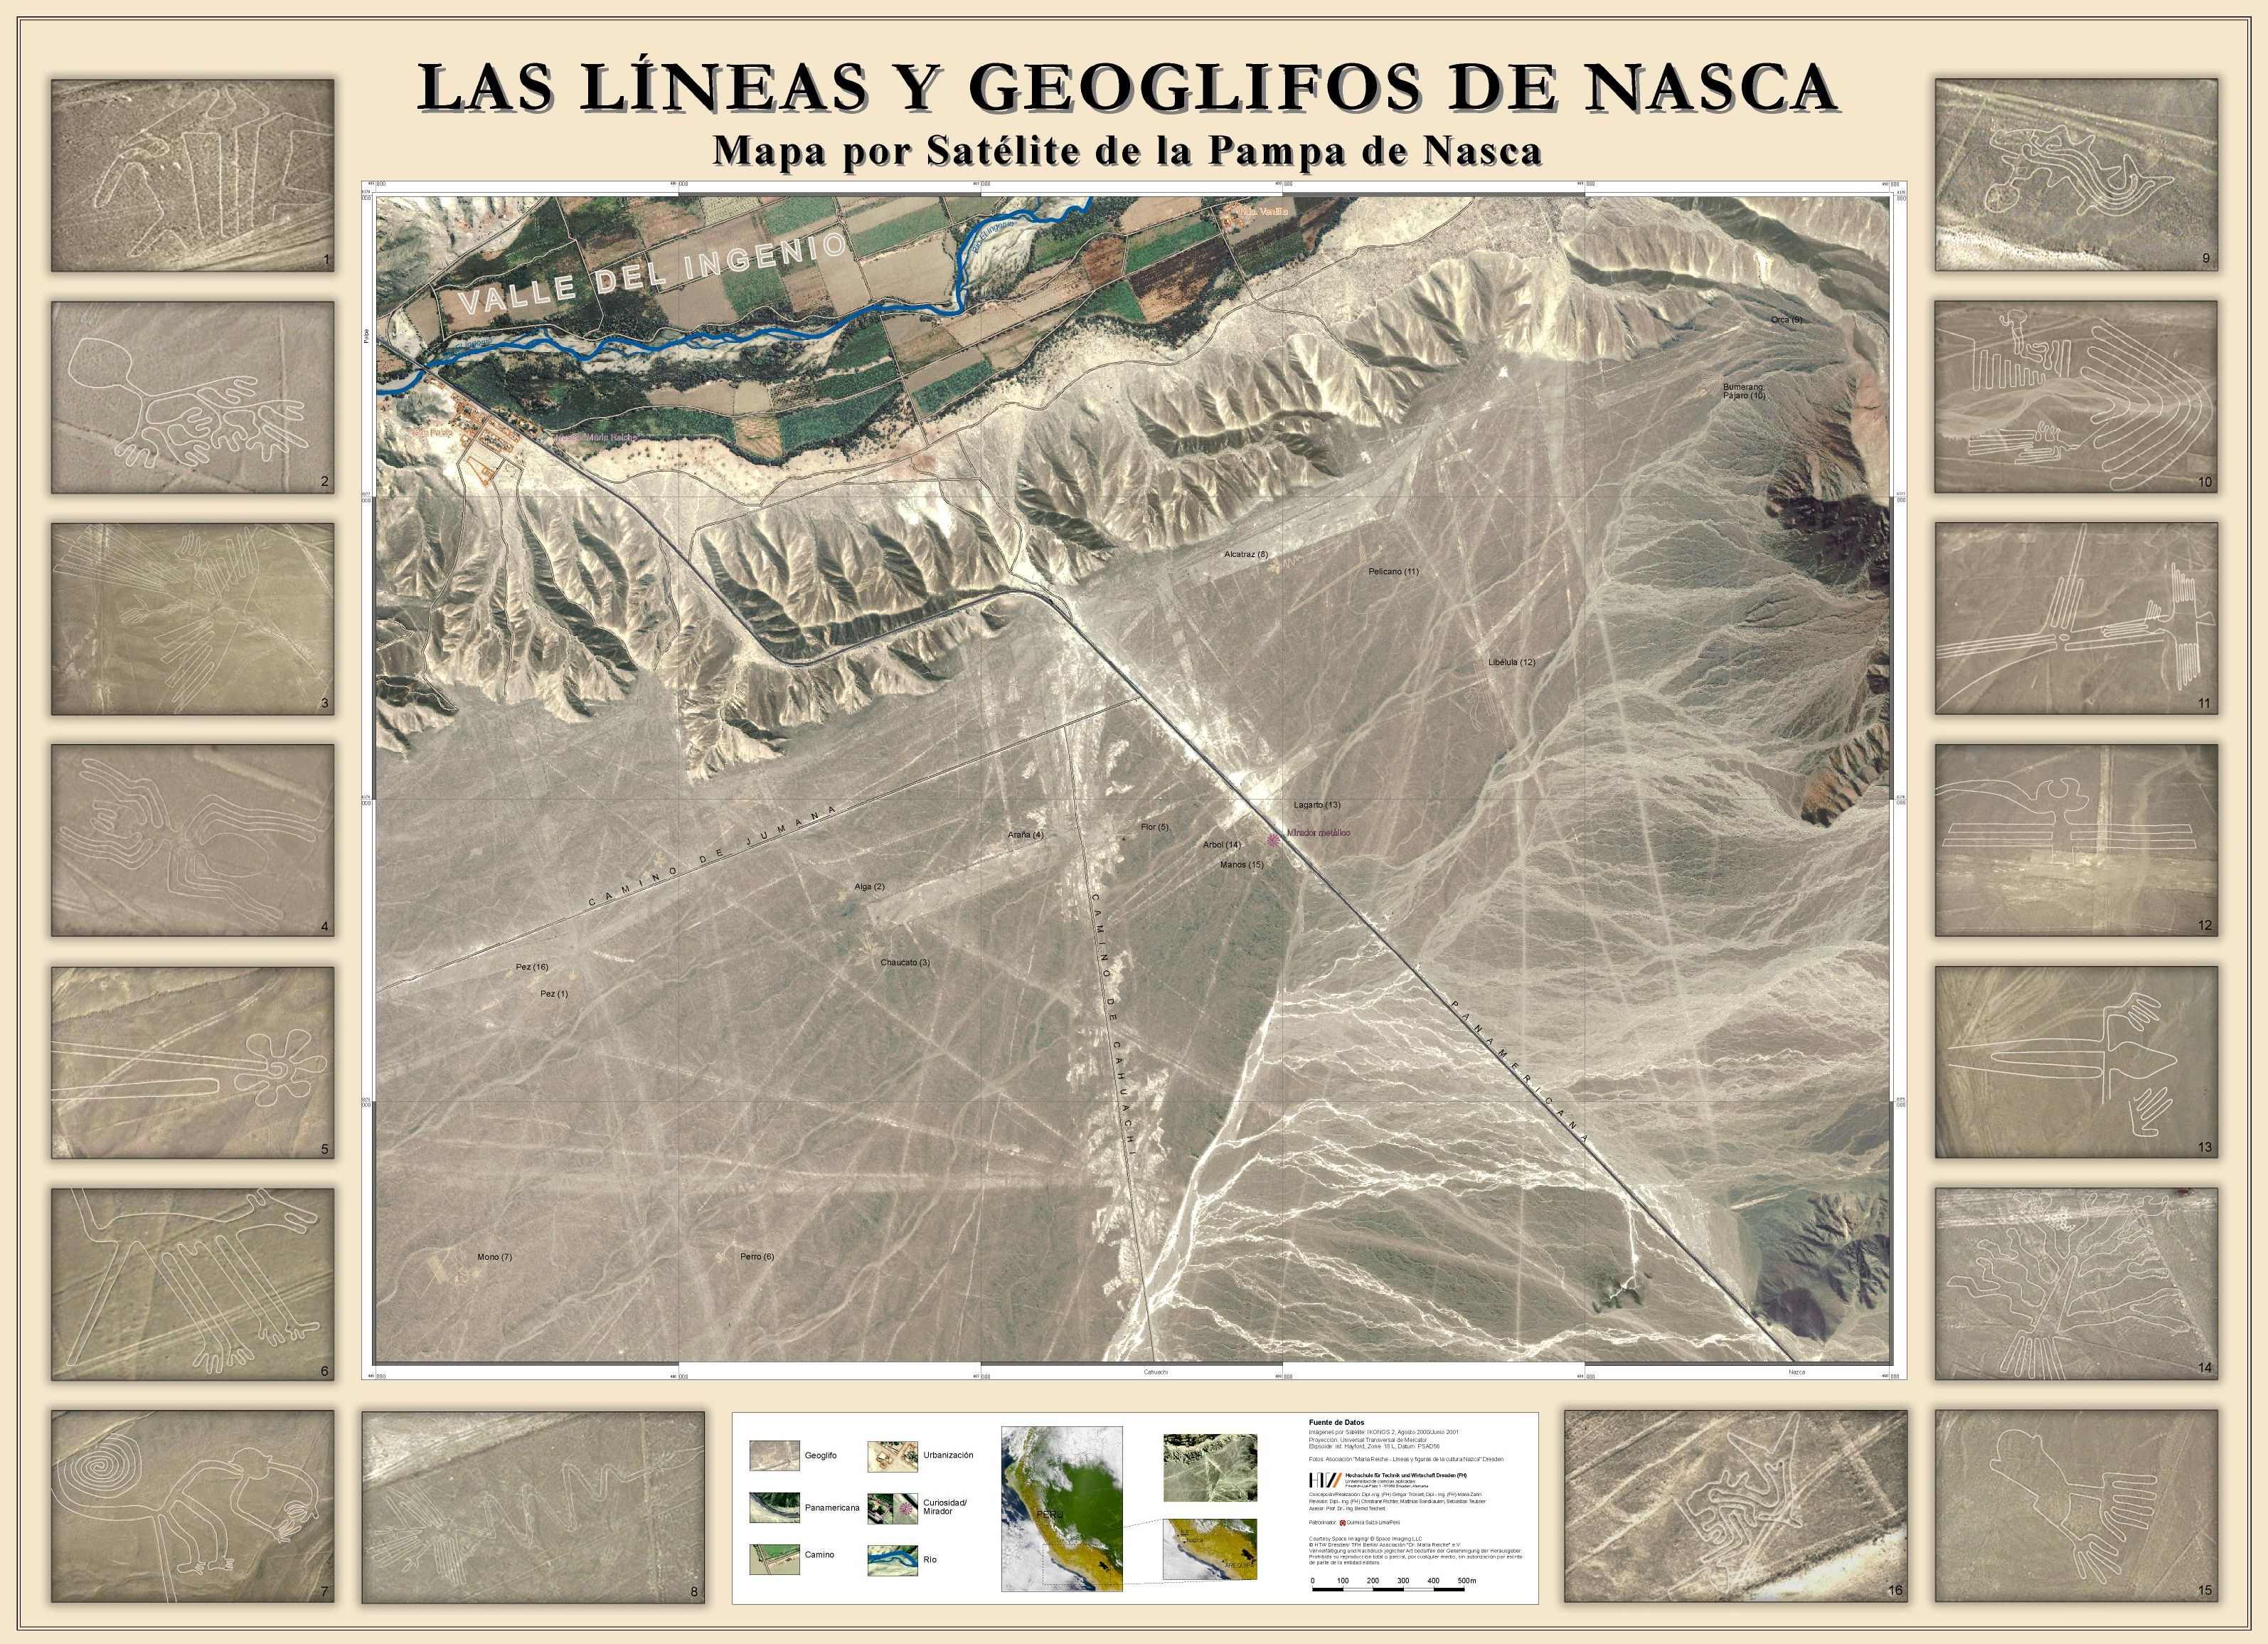 Satellite map of the Nasca Pampas